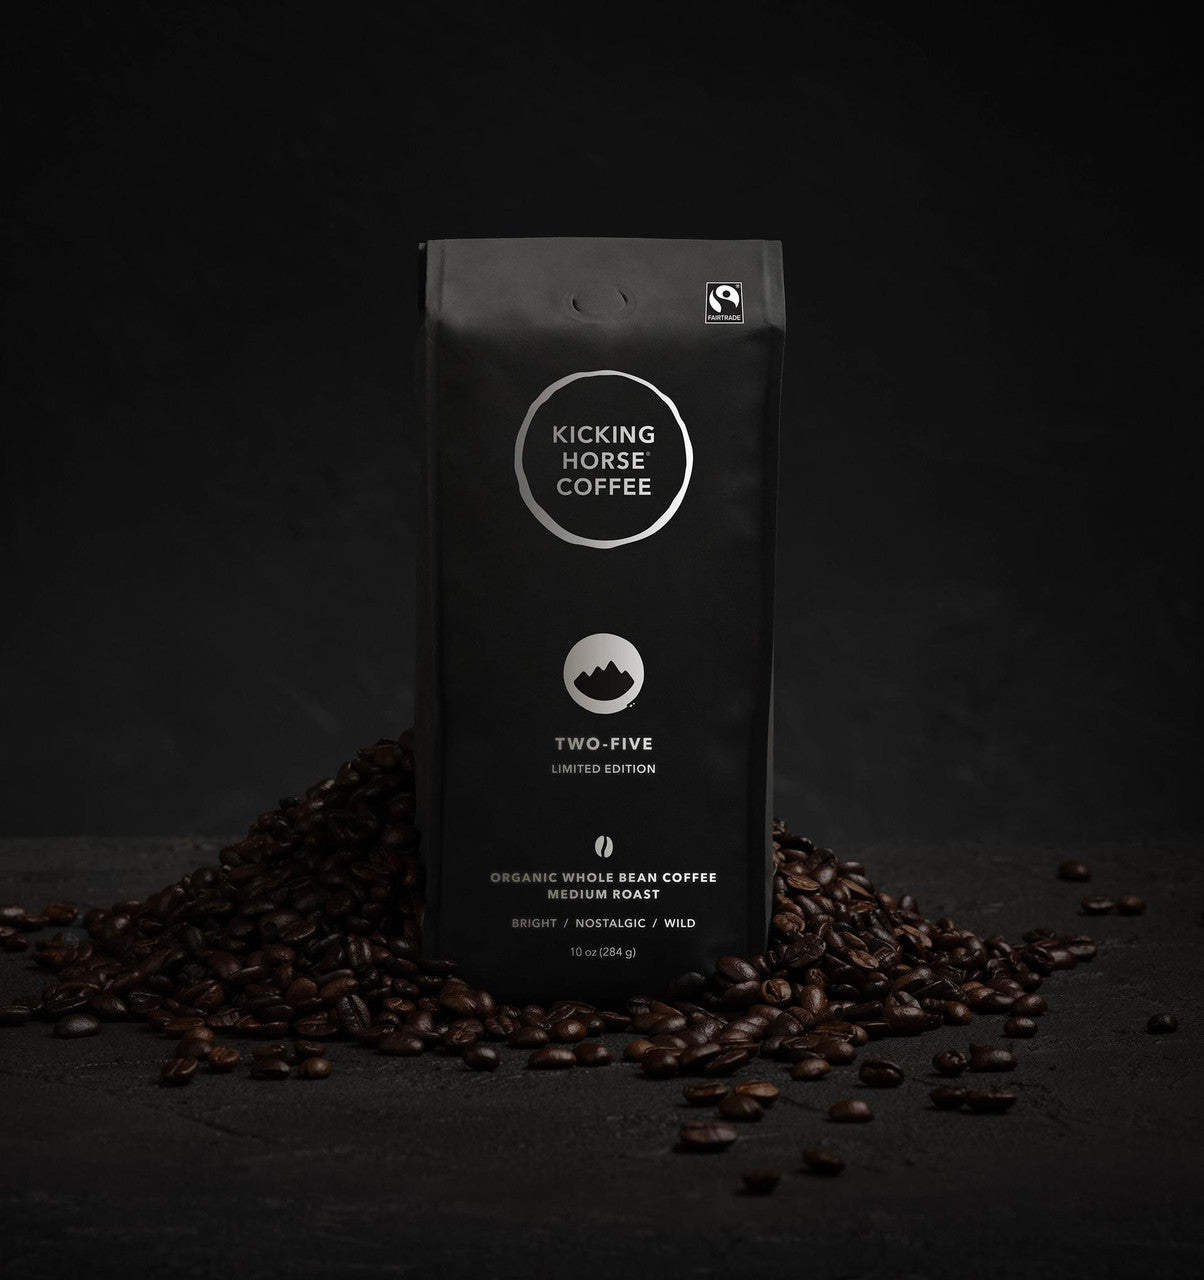 Kicking Horse Whole Bean Coffee Two-Five Medium Roast 284g/10 oz., Limited Time Edition {Imported from Canada}